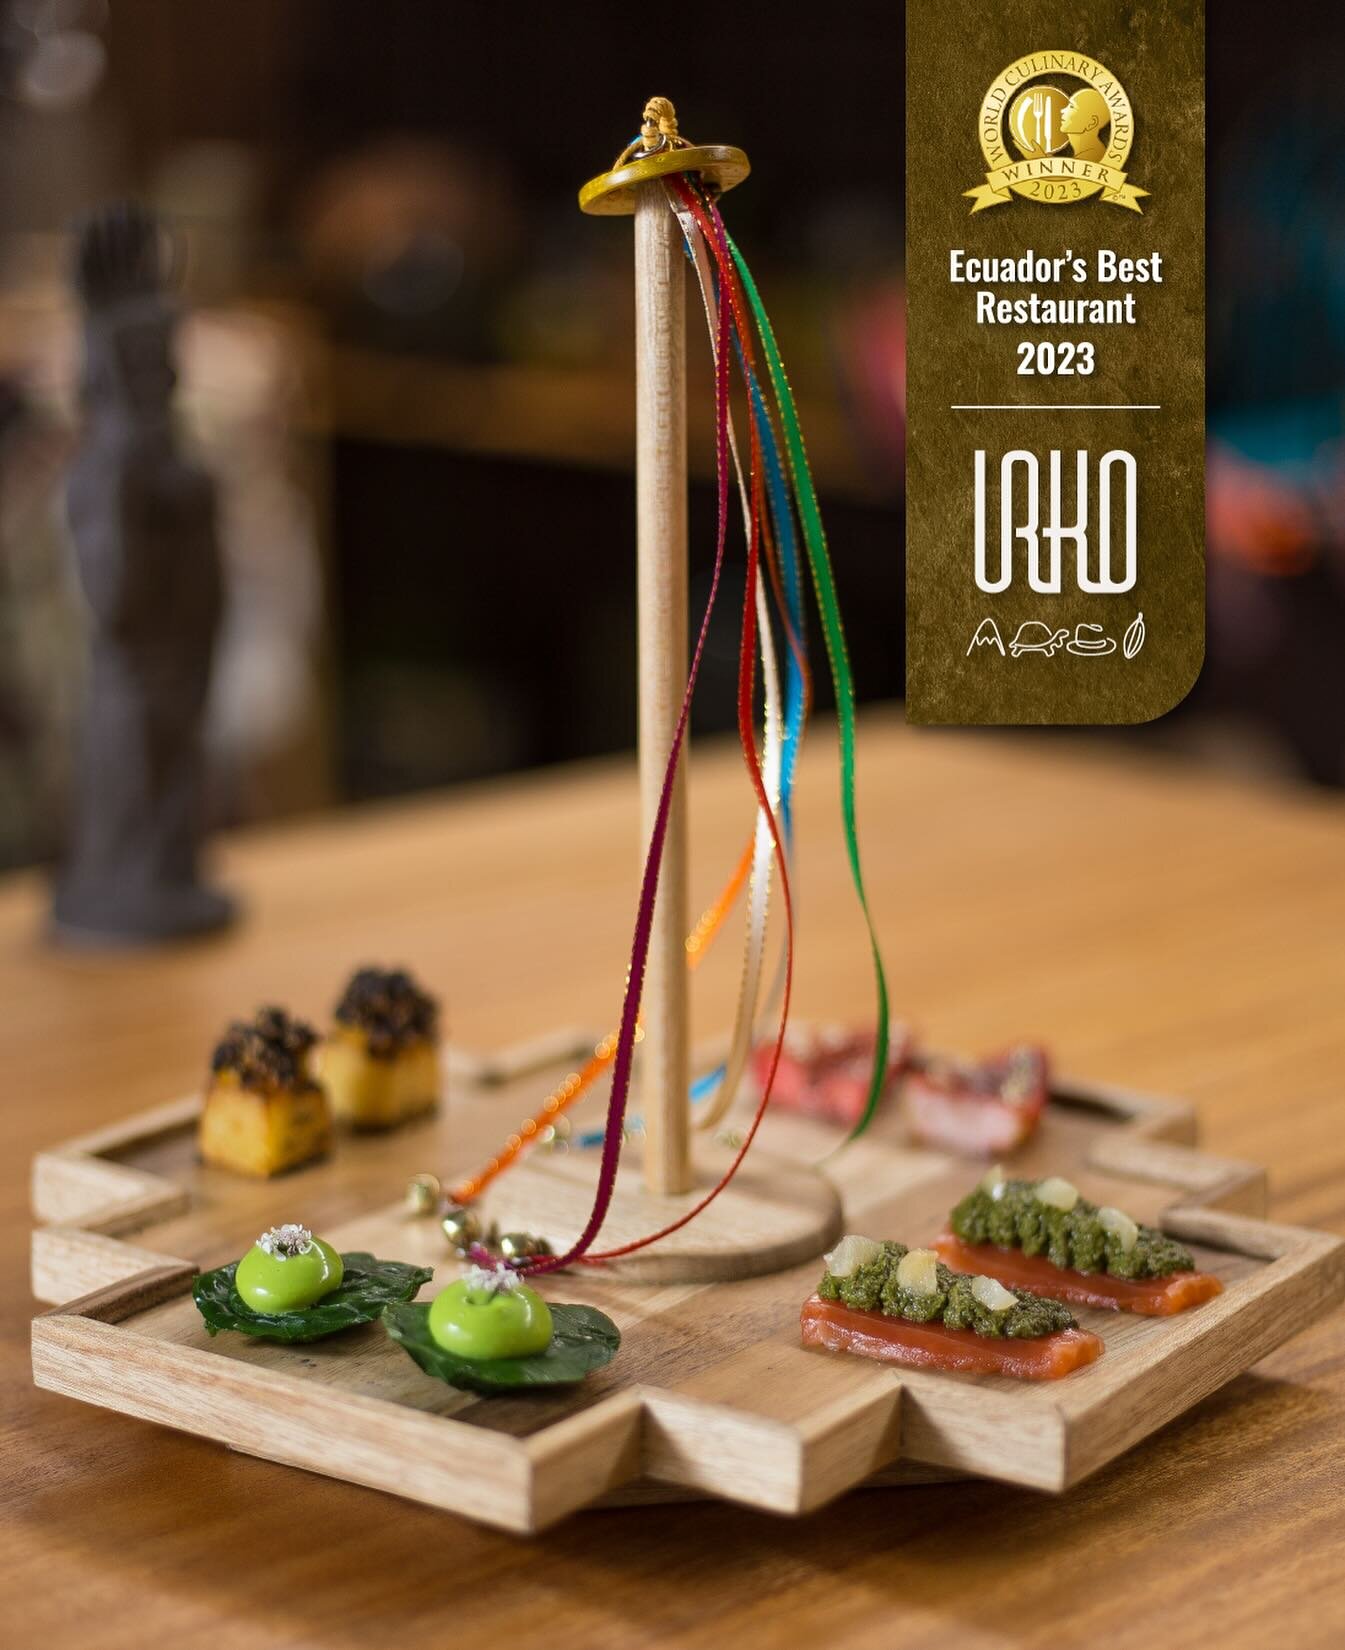 Urko is a dinning experience that showcase the best  Ecuadorian products from the 4 regions, the culture and the indigenous cosmovision through the Raymis cycles menu. 
-
We are honored to announce that we have been selected as the Best Ecuadorian Re